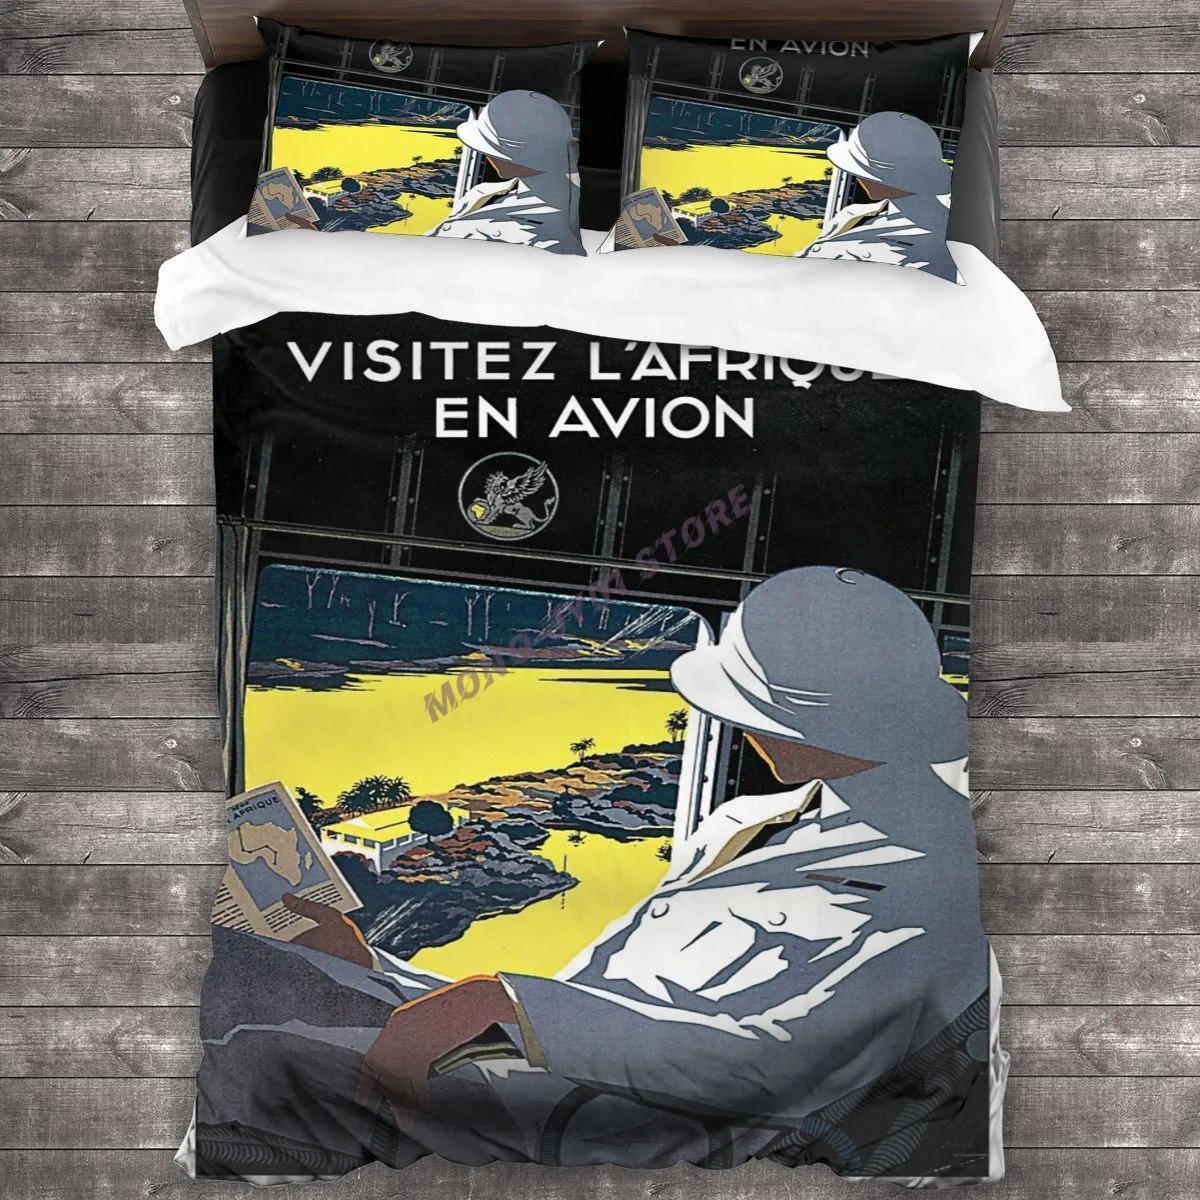 

AIR AFRIQUE Visit Africa By Plane Vintage French Holidays Travel Promotion Bedding Set Duvet Cover Pillowcases Comforter Bedding